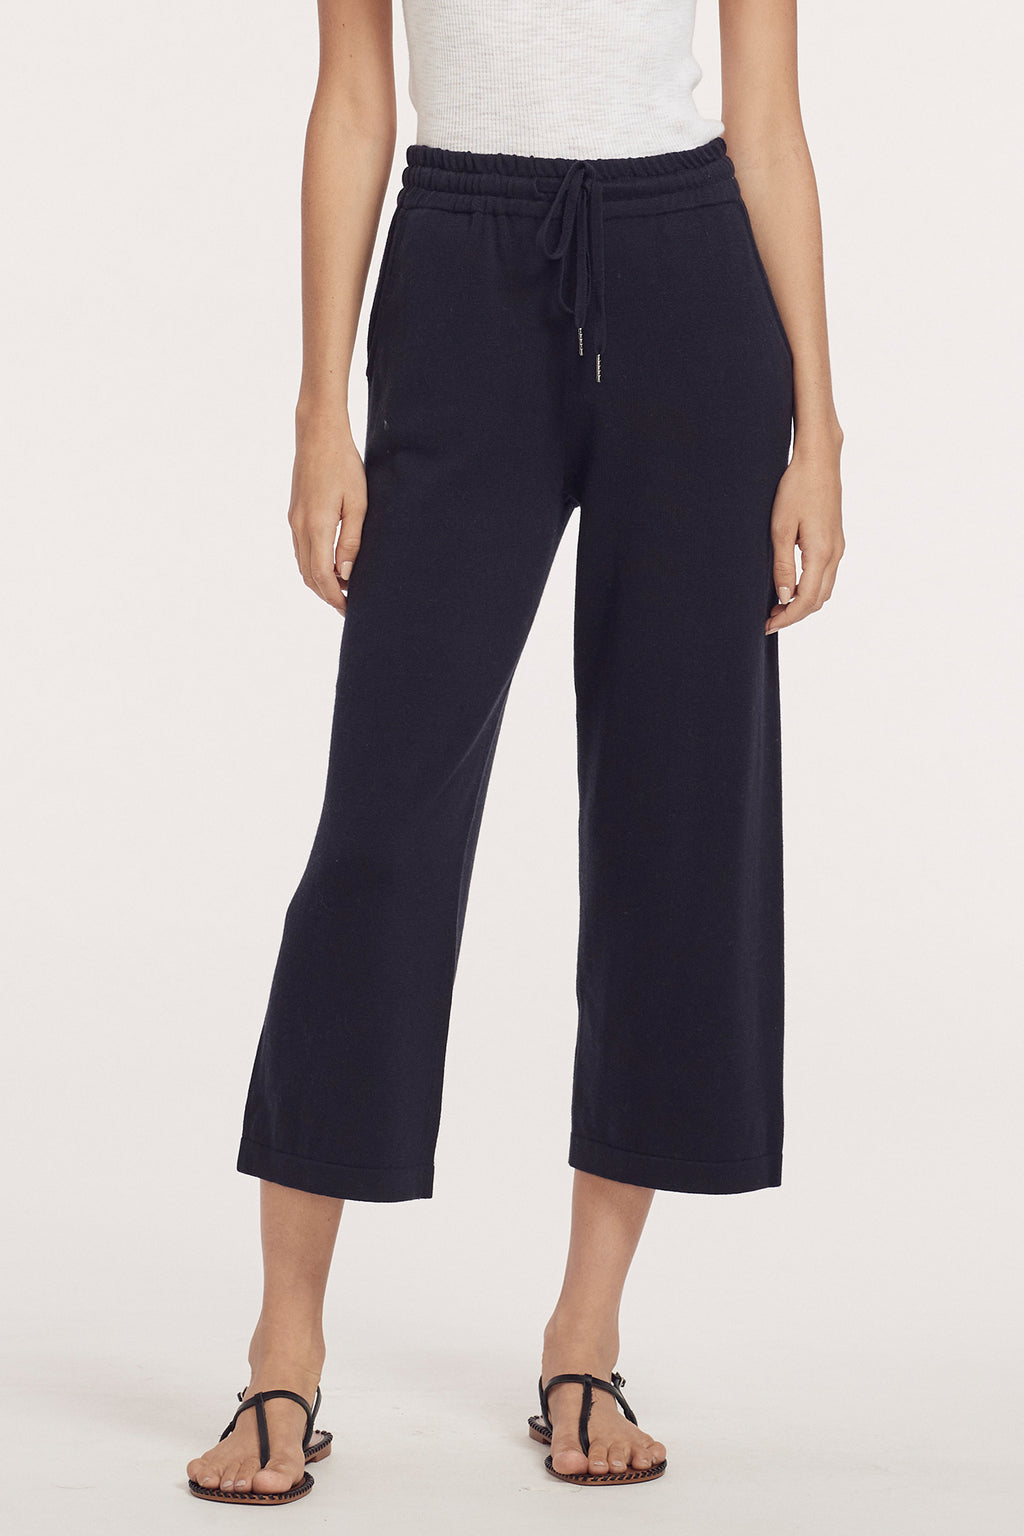 Sweat Pant Ankle Length